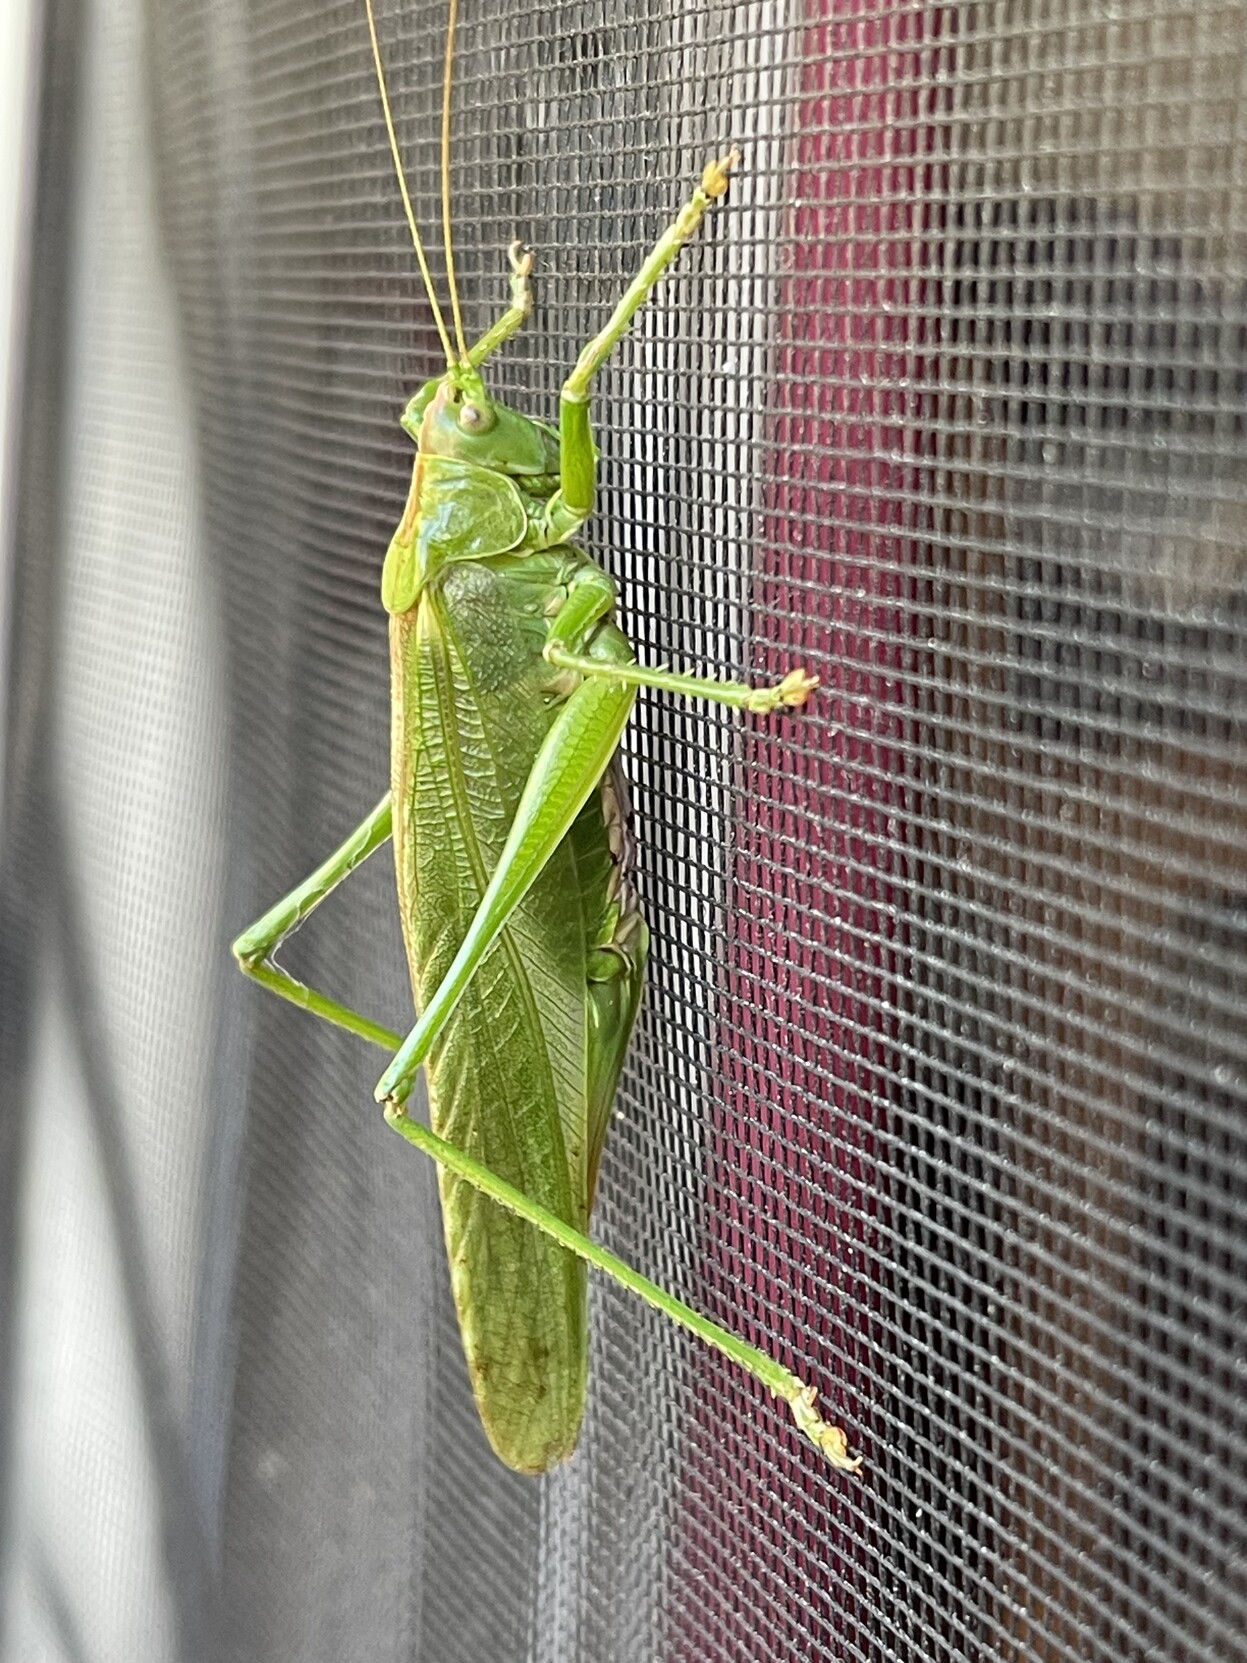 A great green bush cricket clinging to a net curtain 